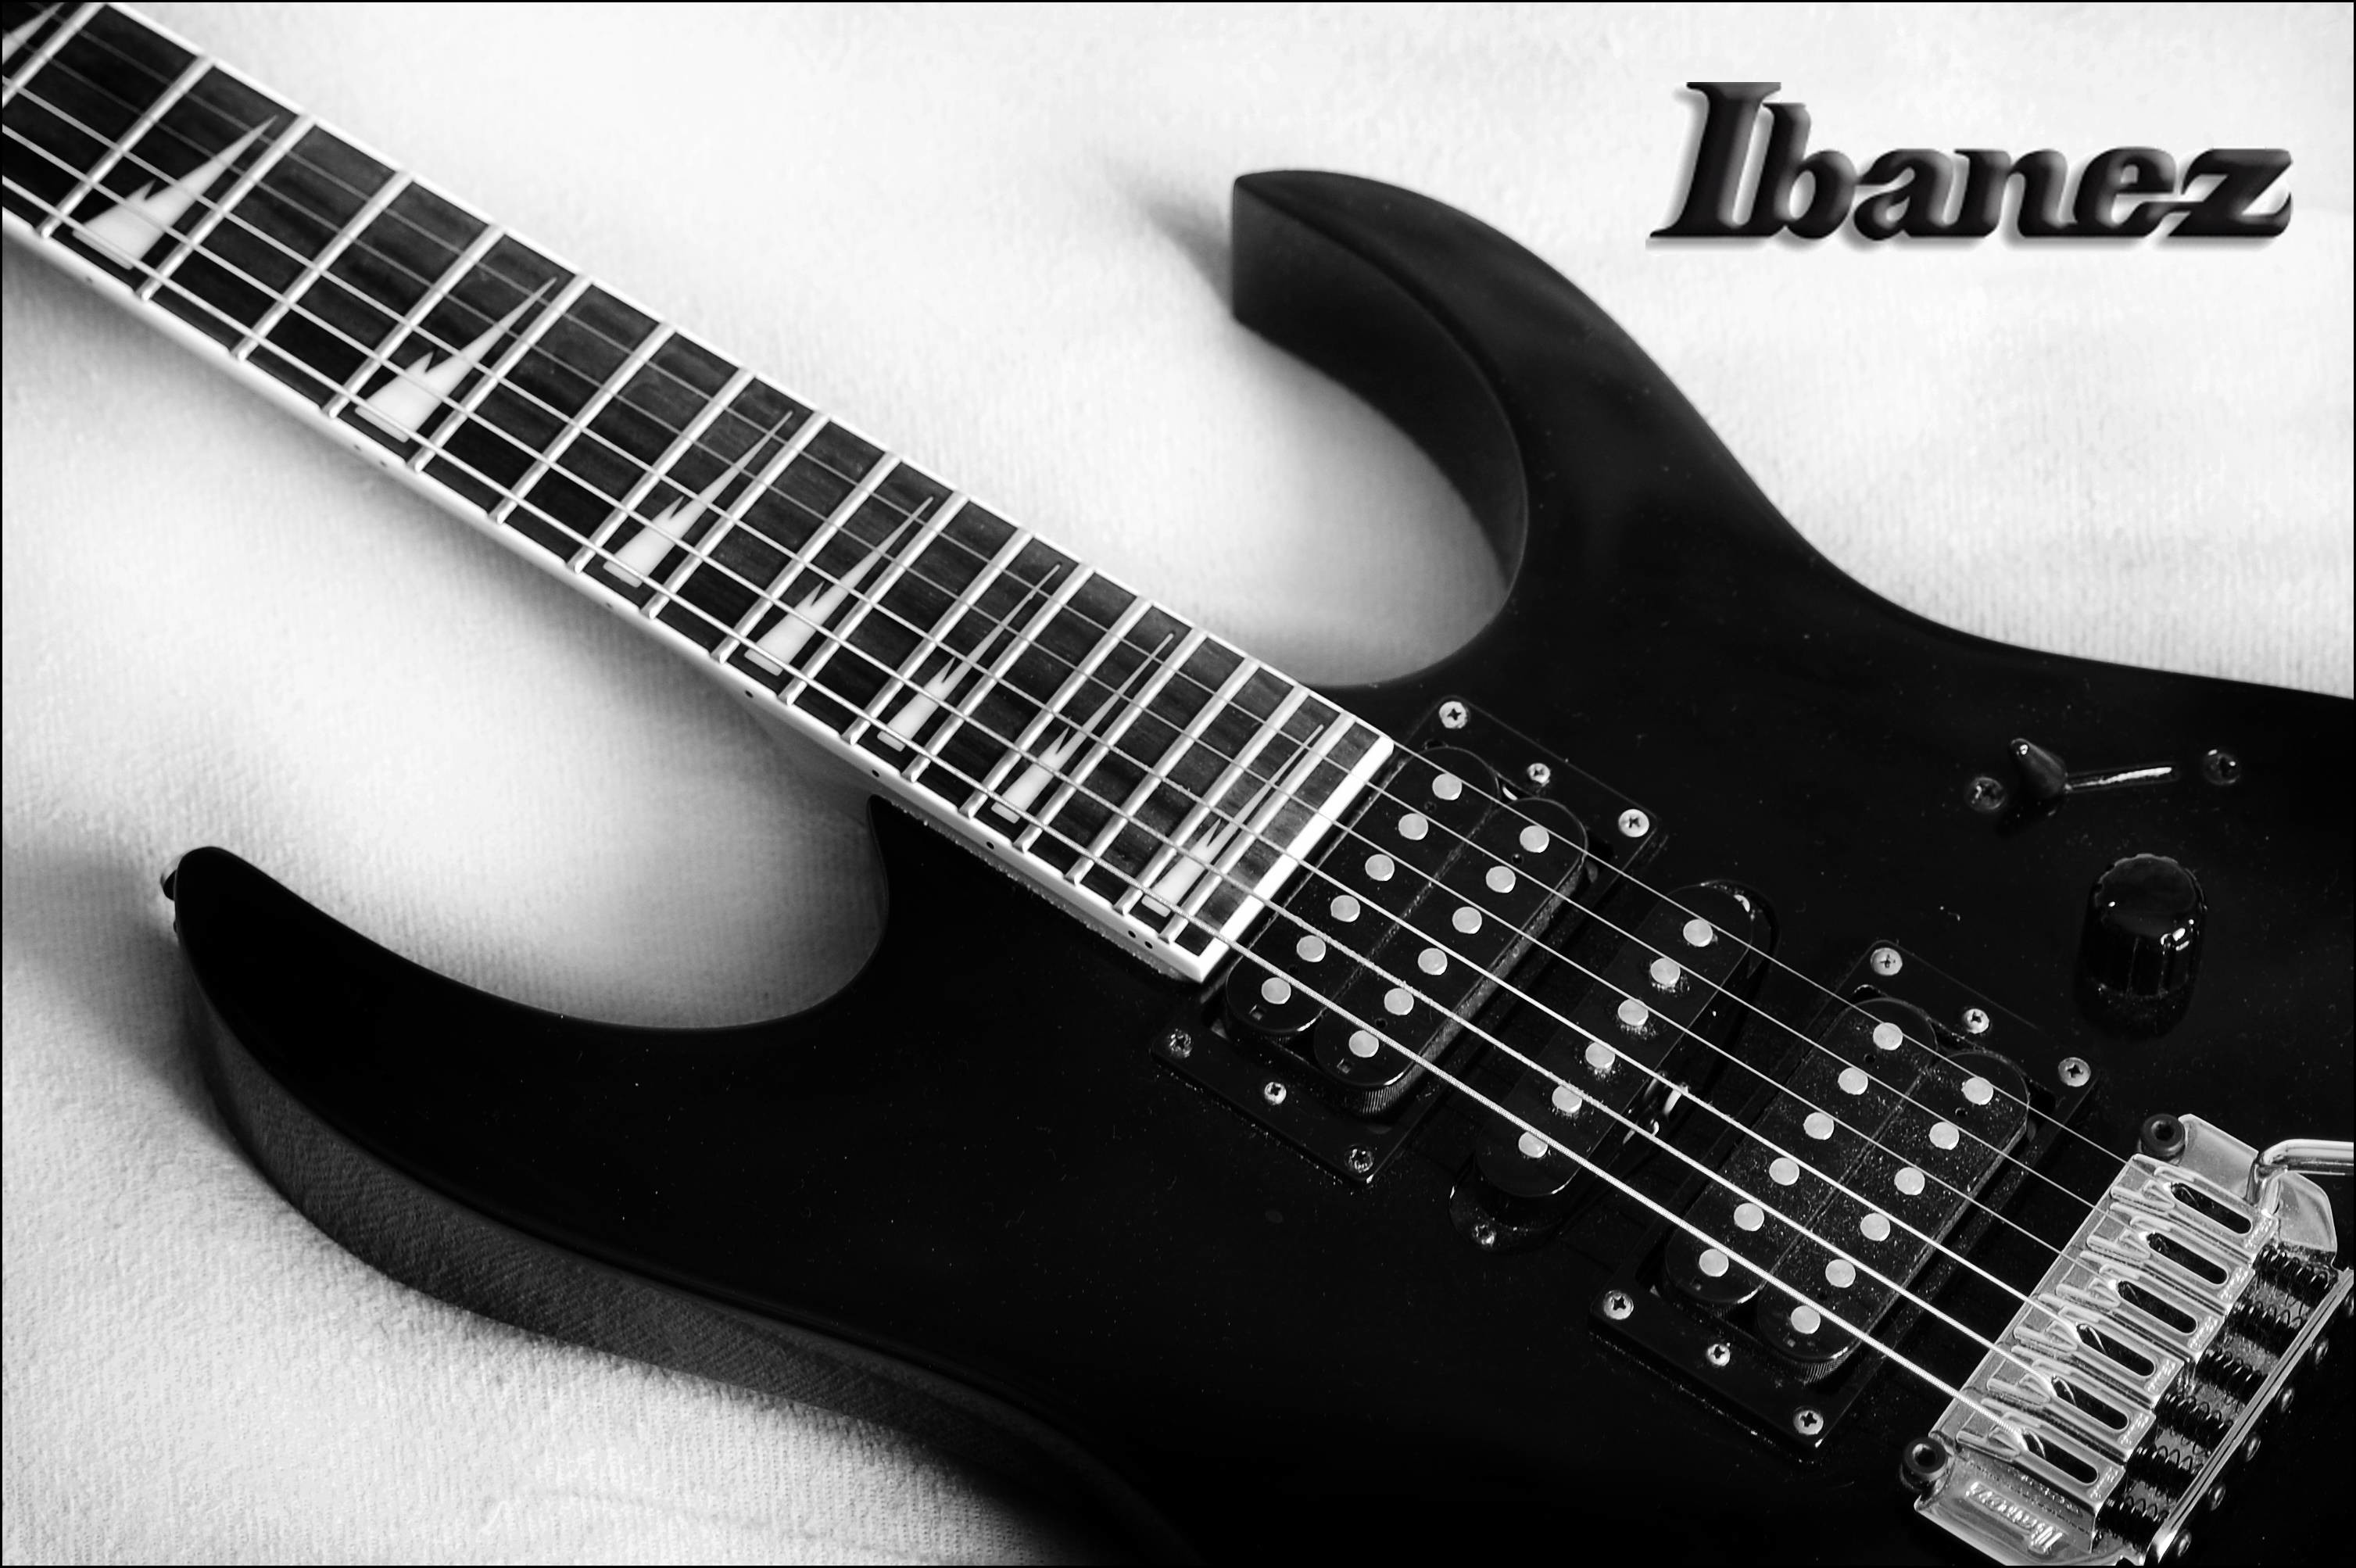 3014x2006 ... ibanez wallpapers wallpaper cave; gibson guitars wallpapers 24; guitar  desktop backgrounds wallpaper cave; electric guitar wallpapers ...